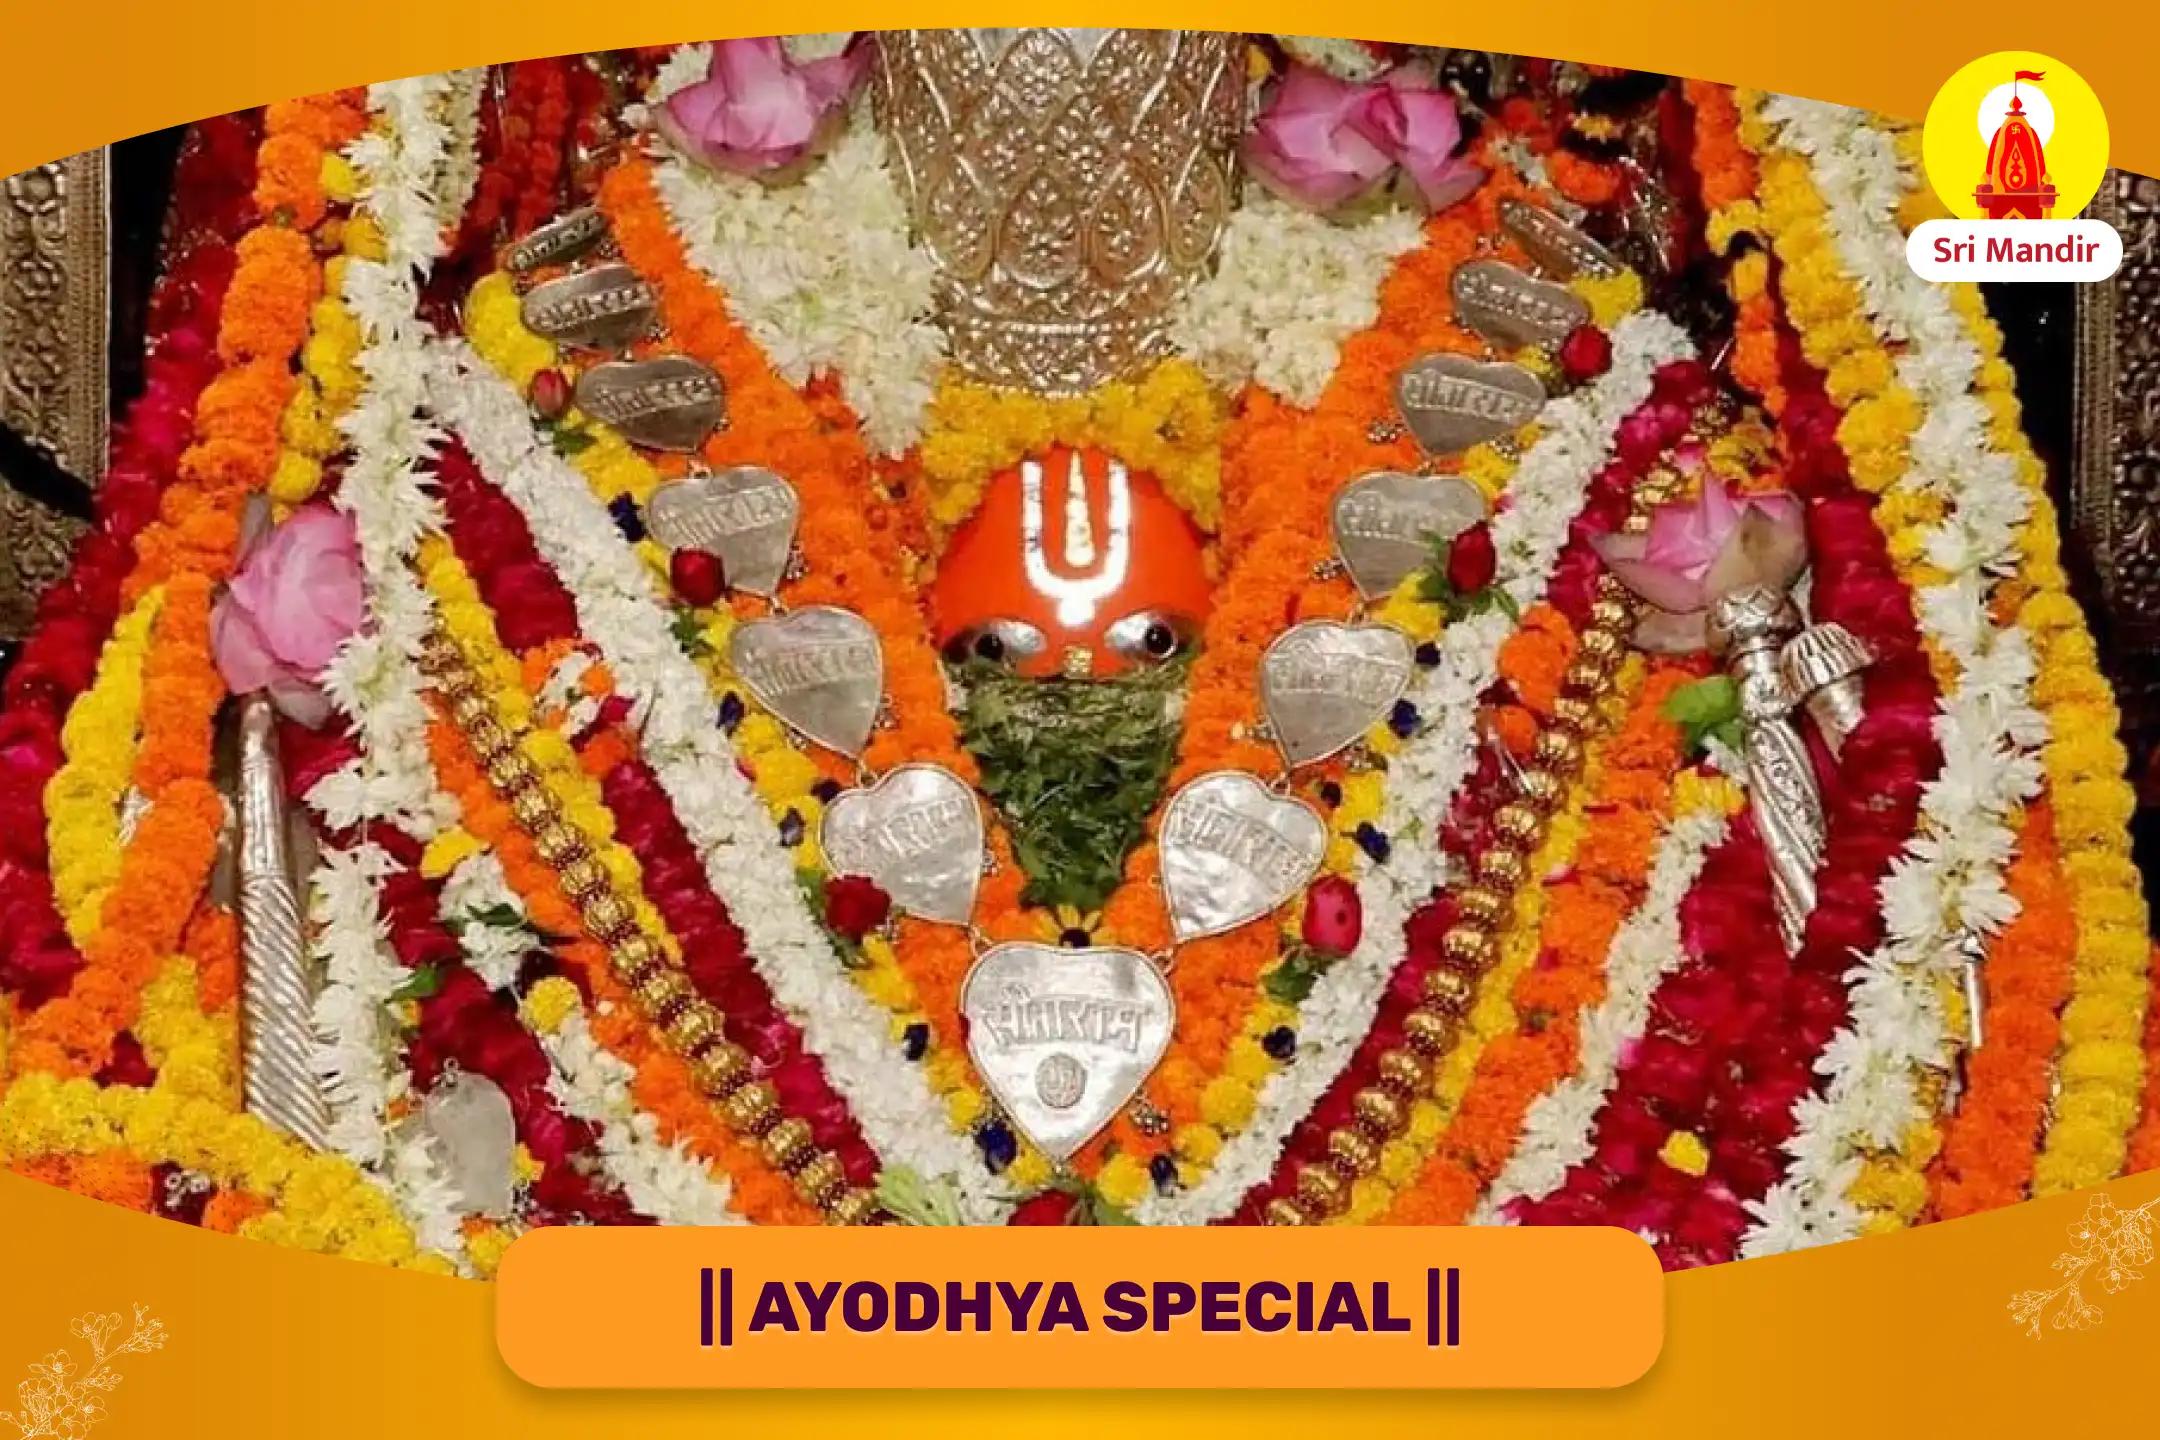 Ayodhya Special Sankat Mochan 1008 Hanuman Mahamantra Jaap and Sunderkand Path For Overcoming Challenges and Gaining Confidence